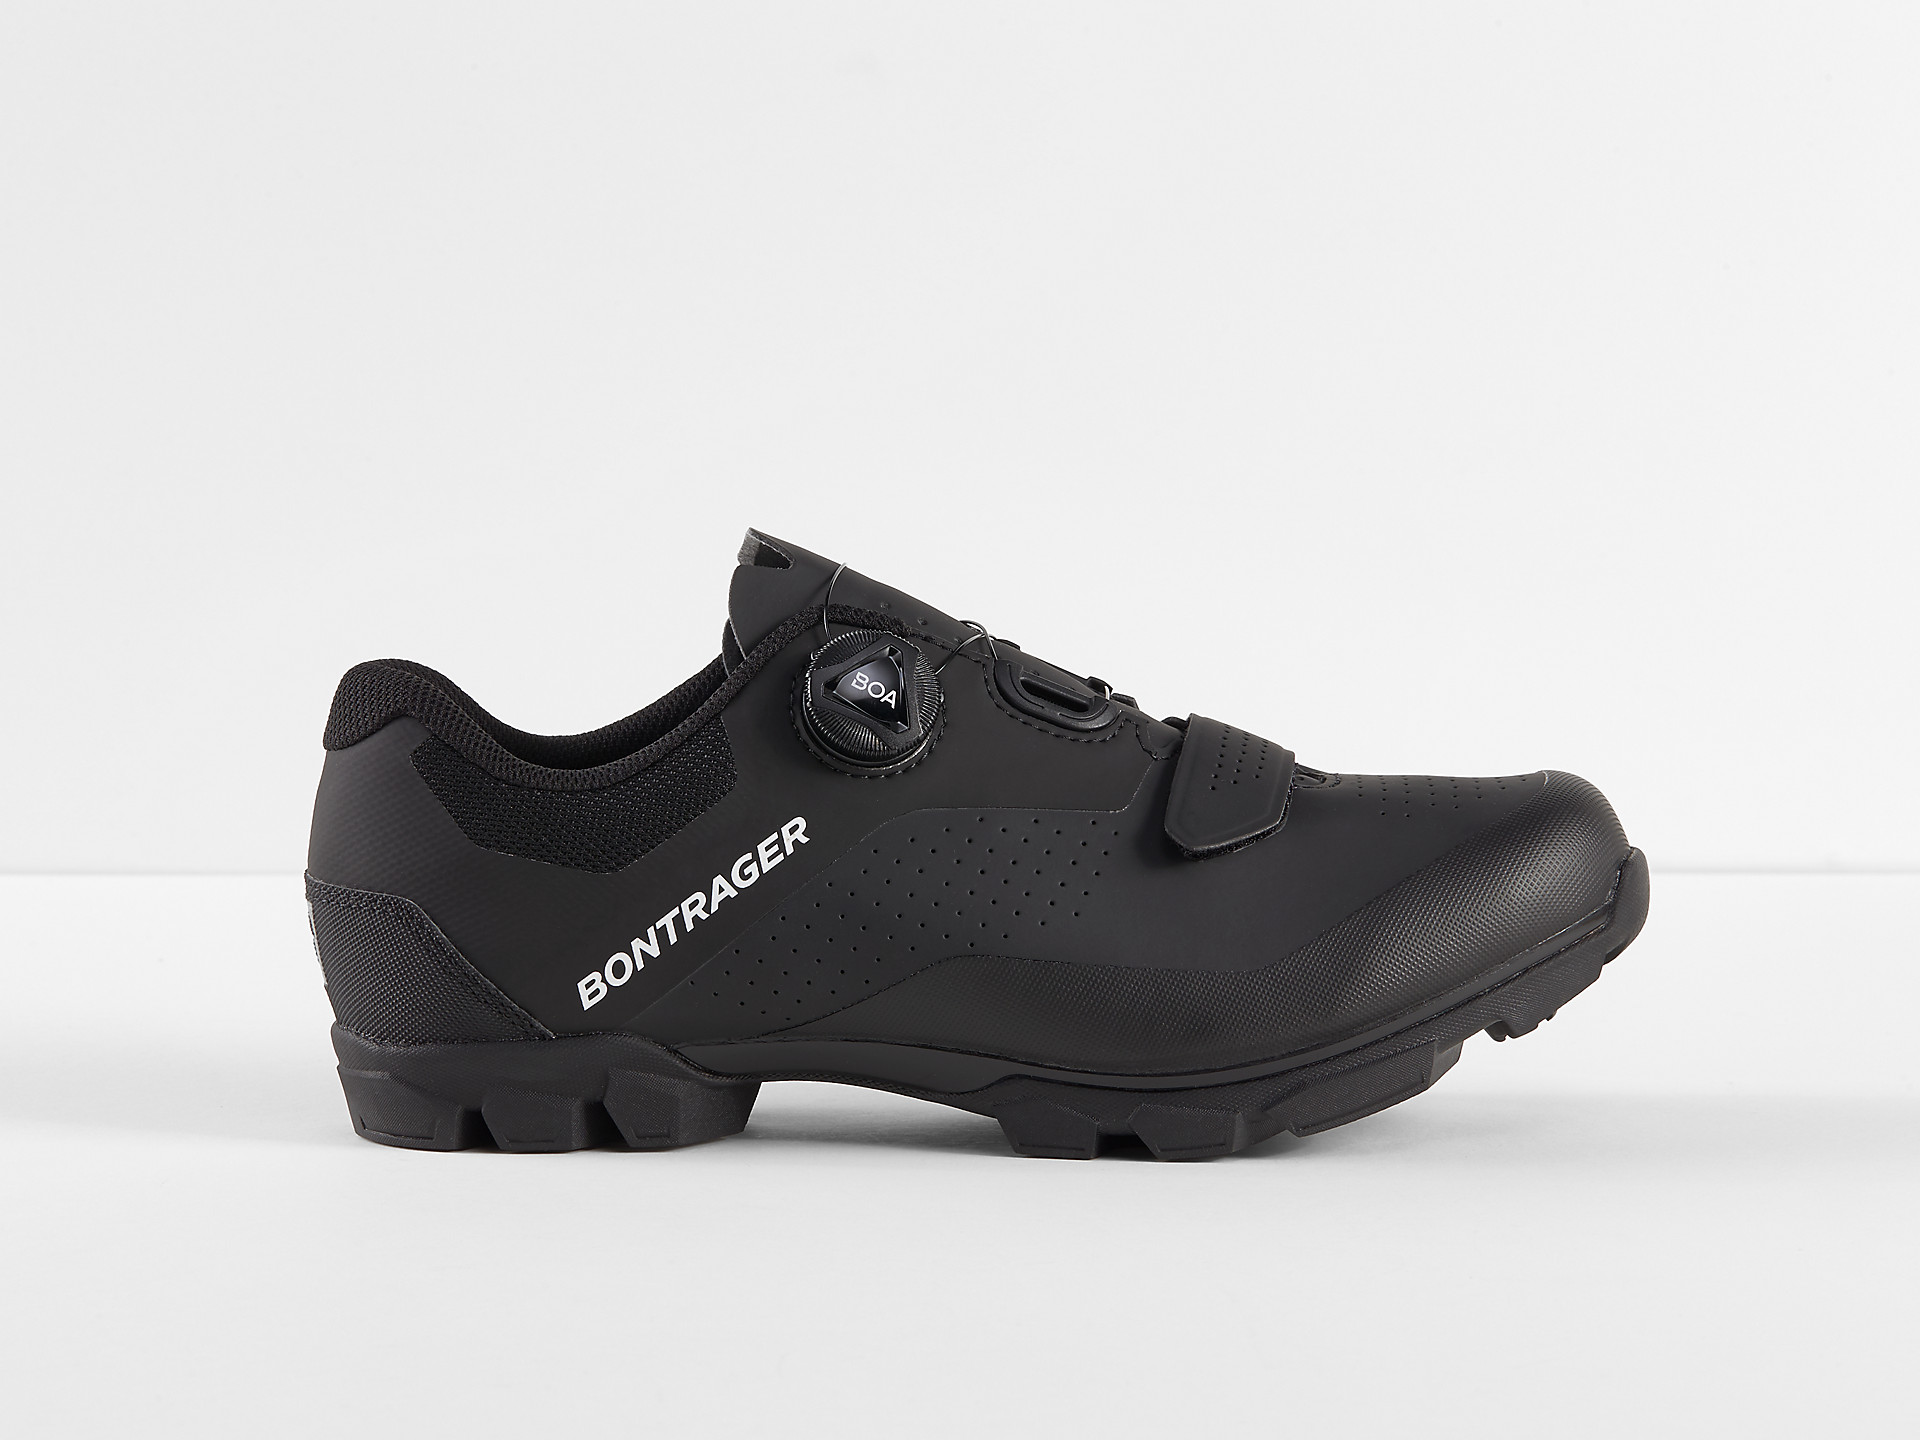 <a href="https://cycles-clement.be/product/bont-chaussures-foray-vtt-44-black/">BONT CHAUSSURES FORAY VTT 44 BLACK</a>